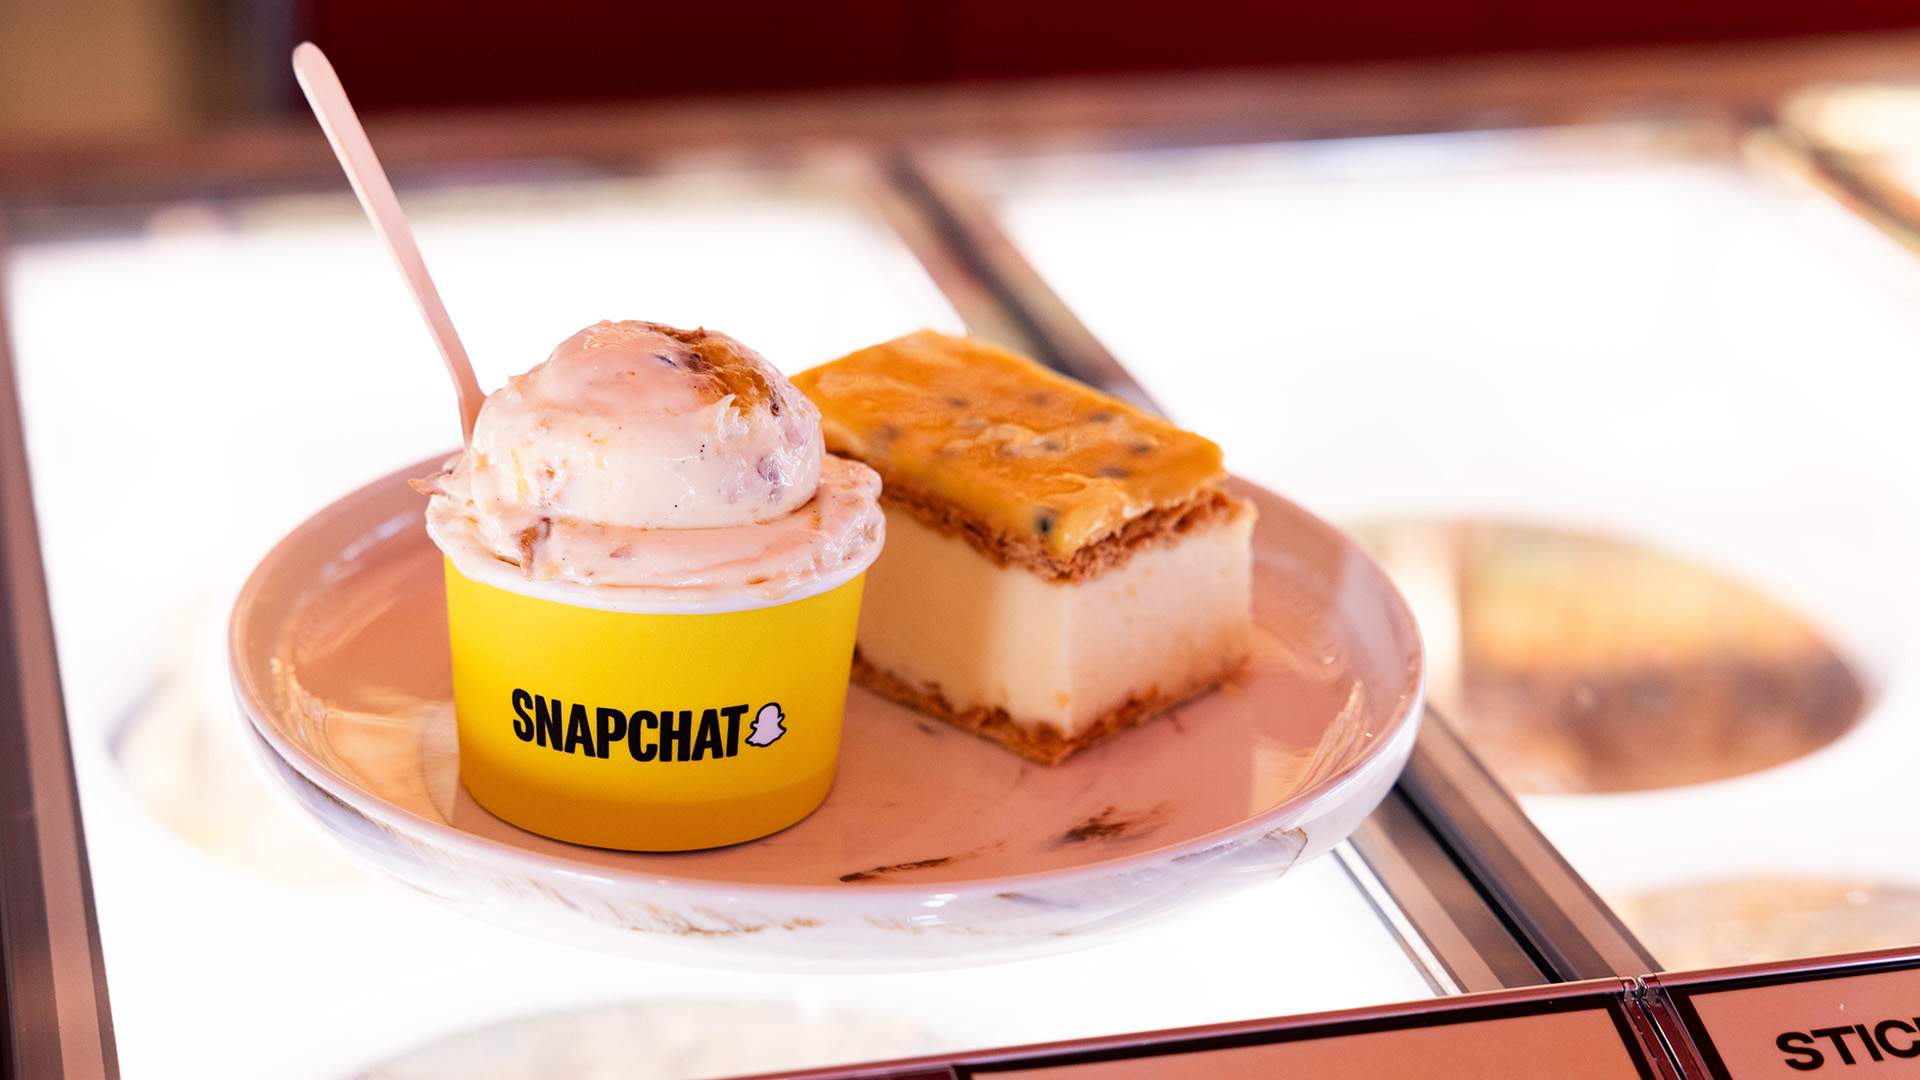 Messina Will Give You a Free Scoop of Vanilla Slice-Inspired Gelato Today If You Have Snapchat on Your Phone